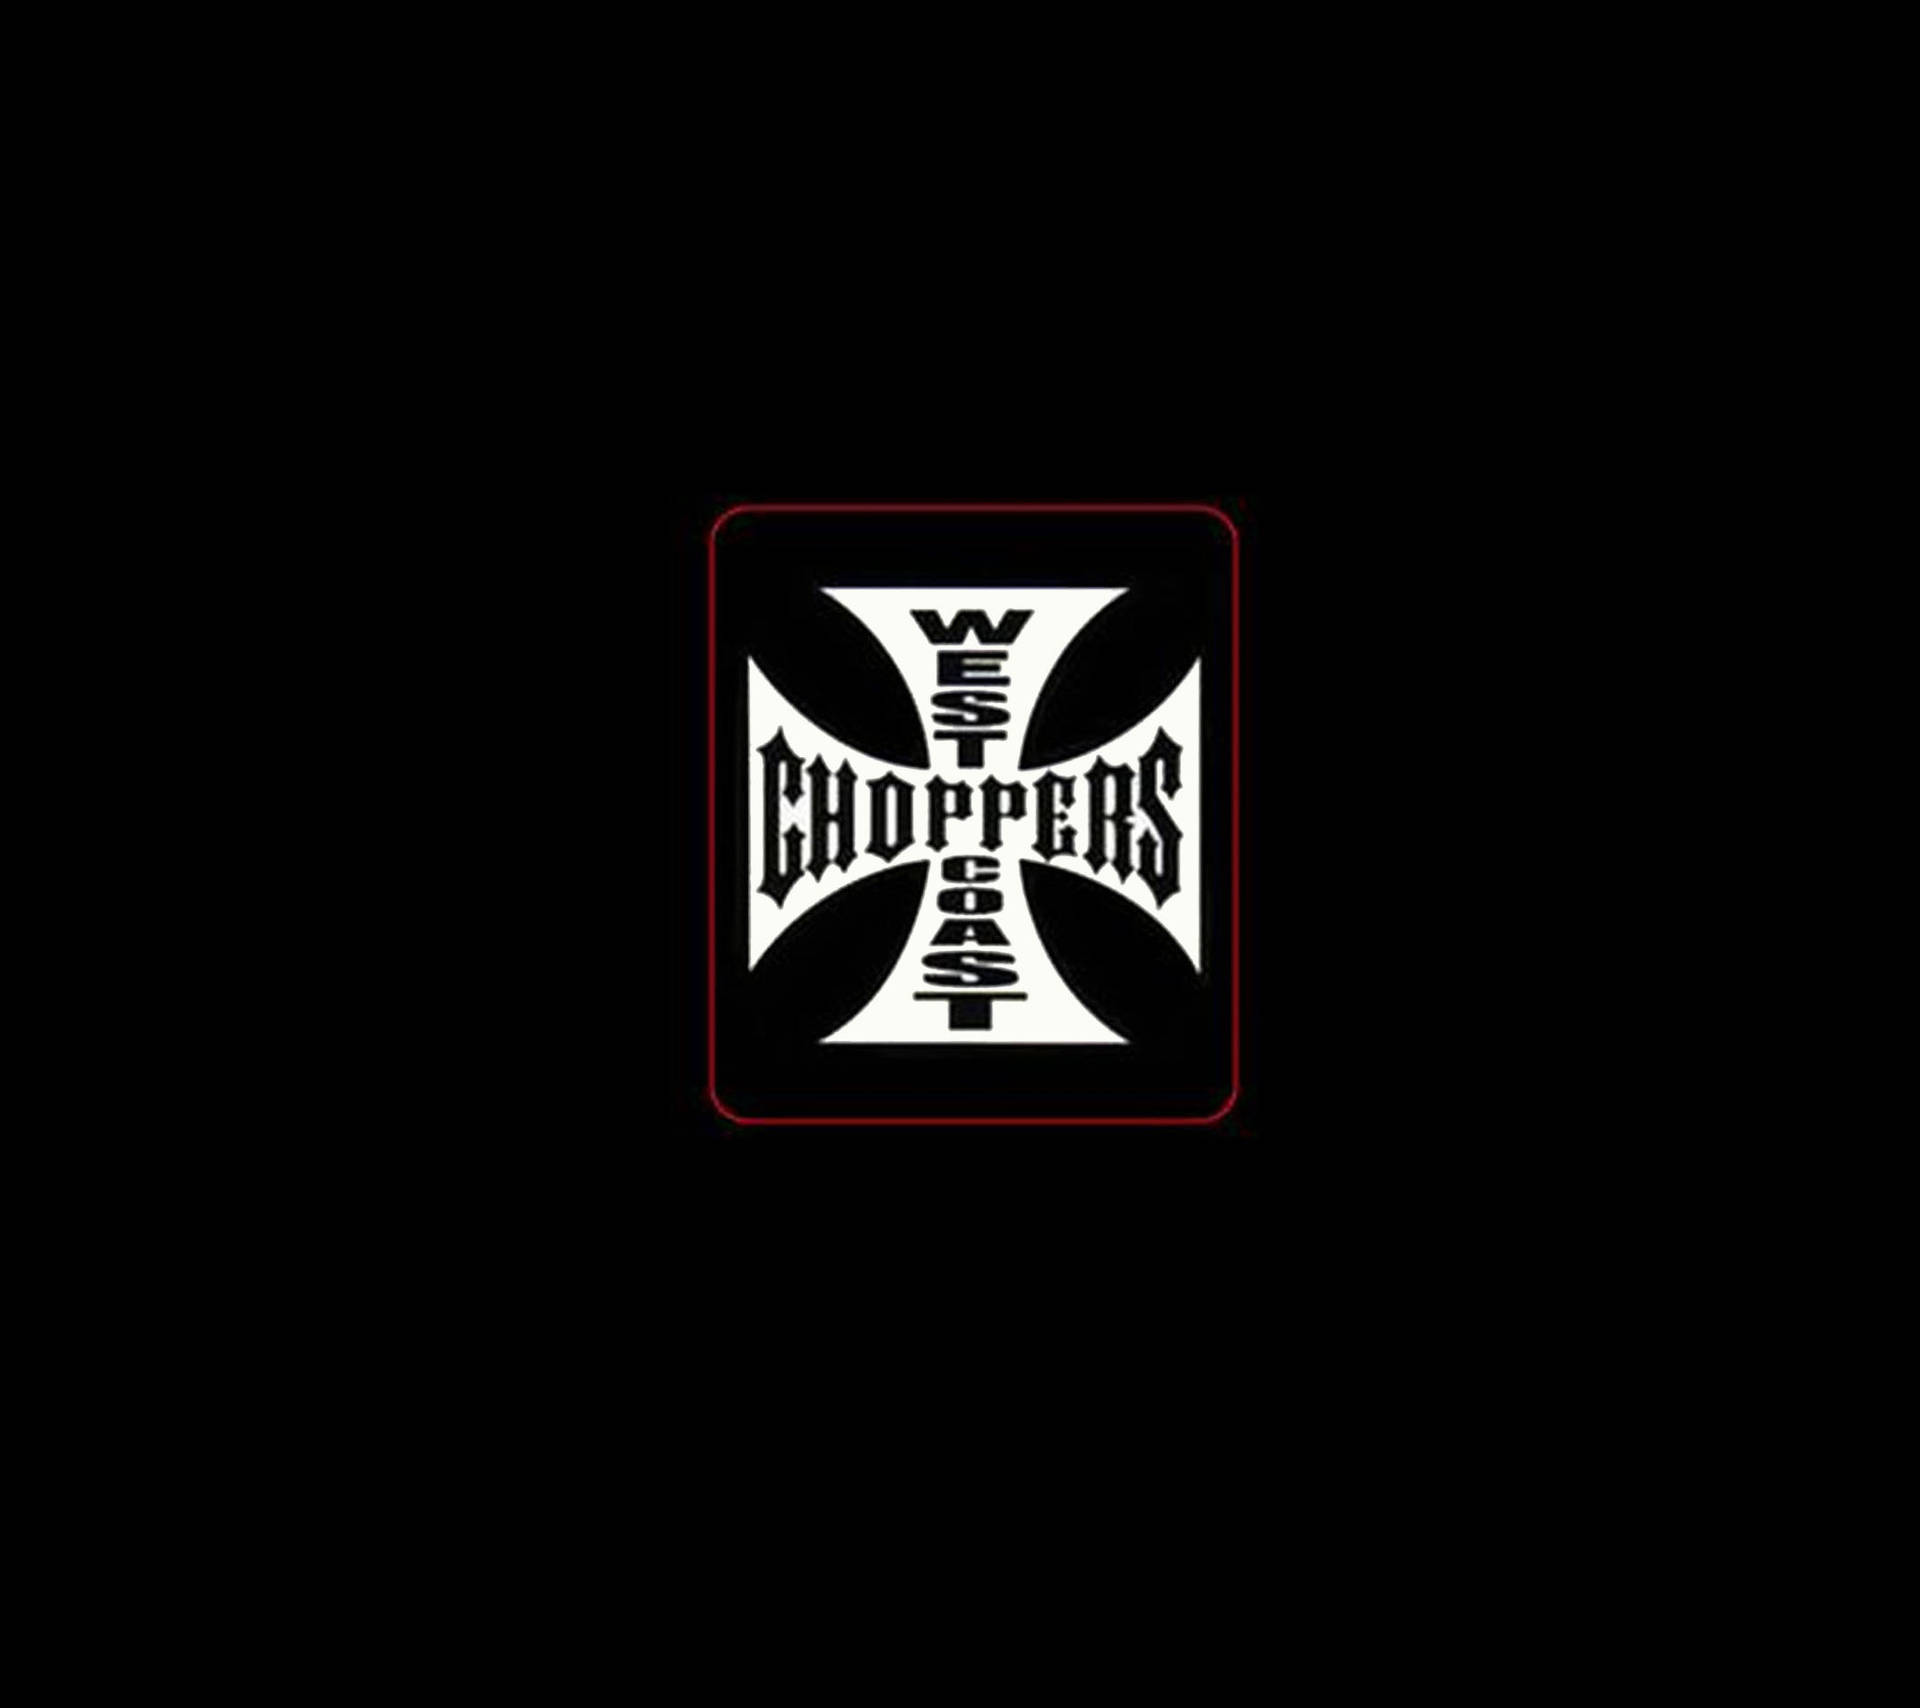 West Coast Choppers - Tradition of Excellence Wallpaper